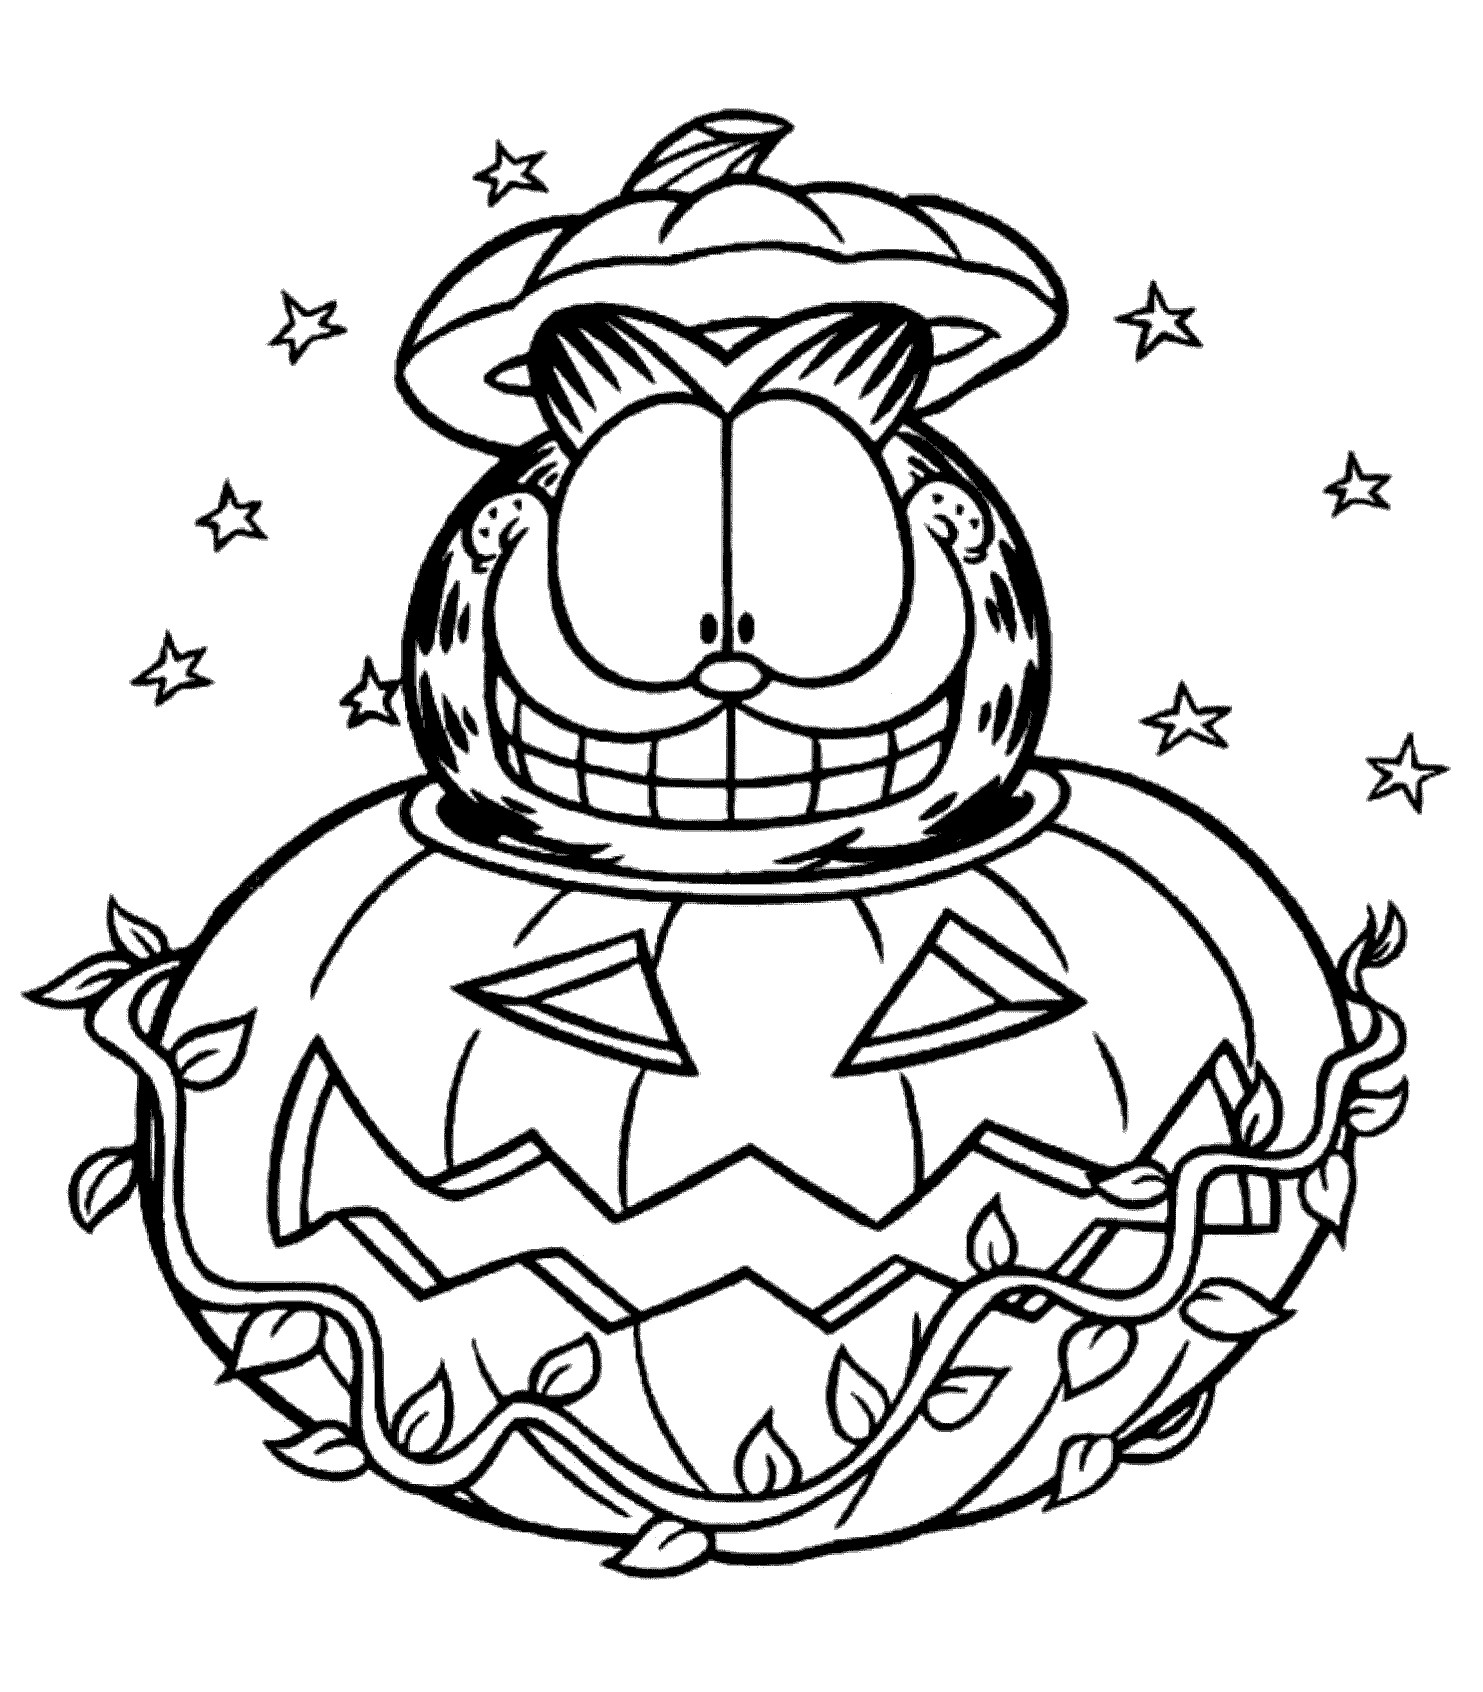 Free Halloween Coloring Pages For Toddlers
 Garfield Halloween coloring pages for kids printable free